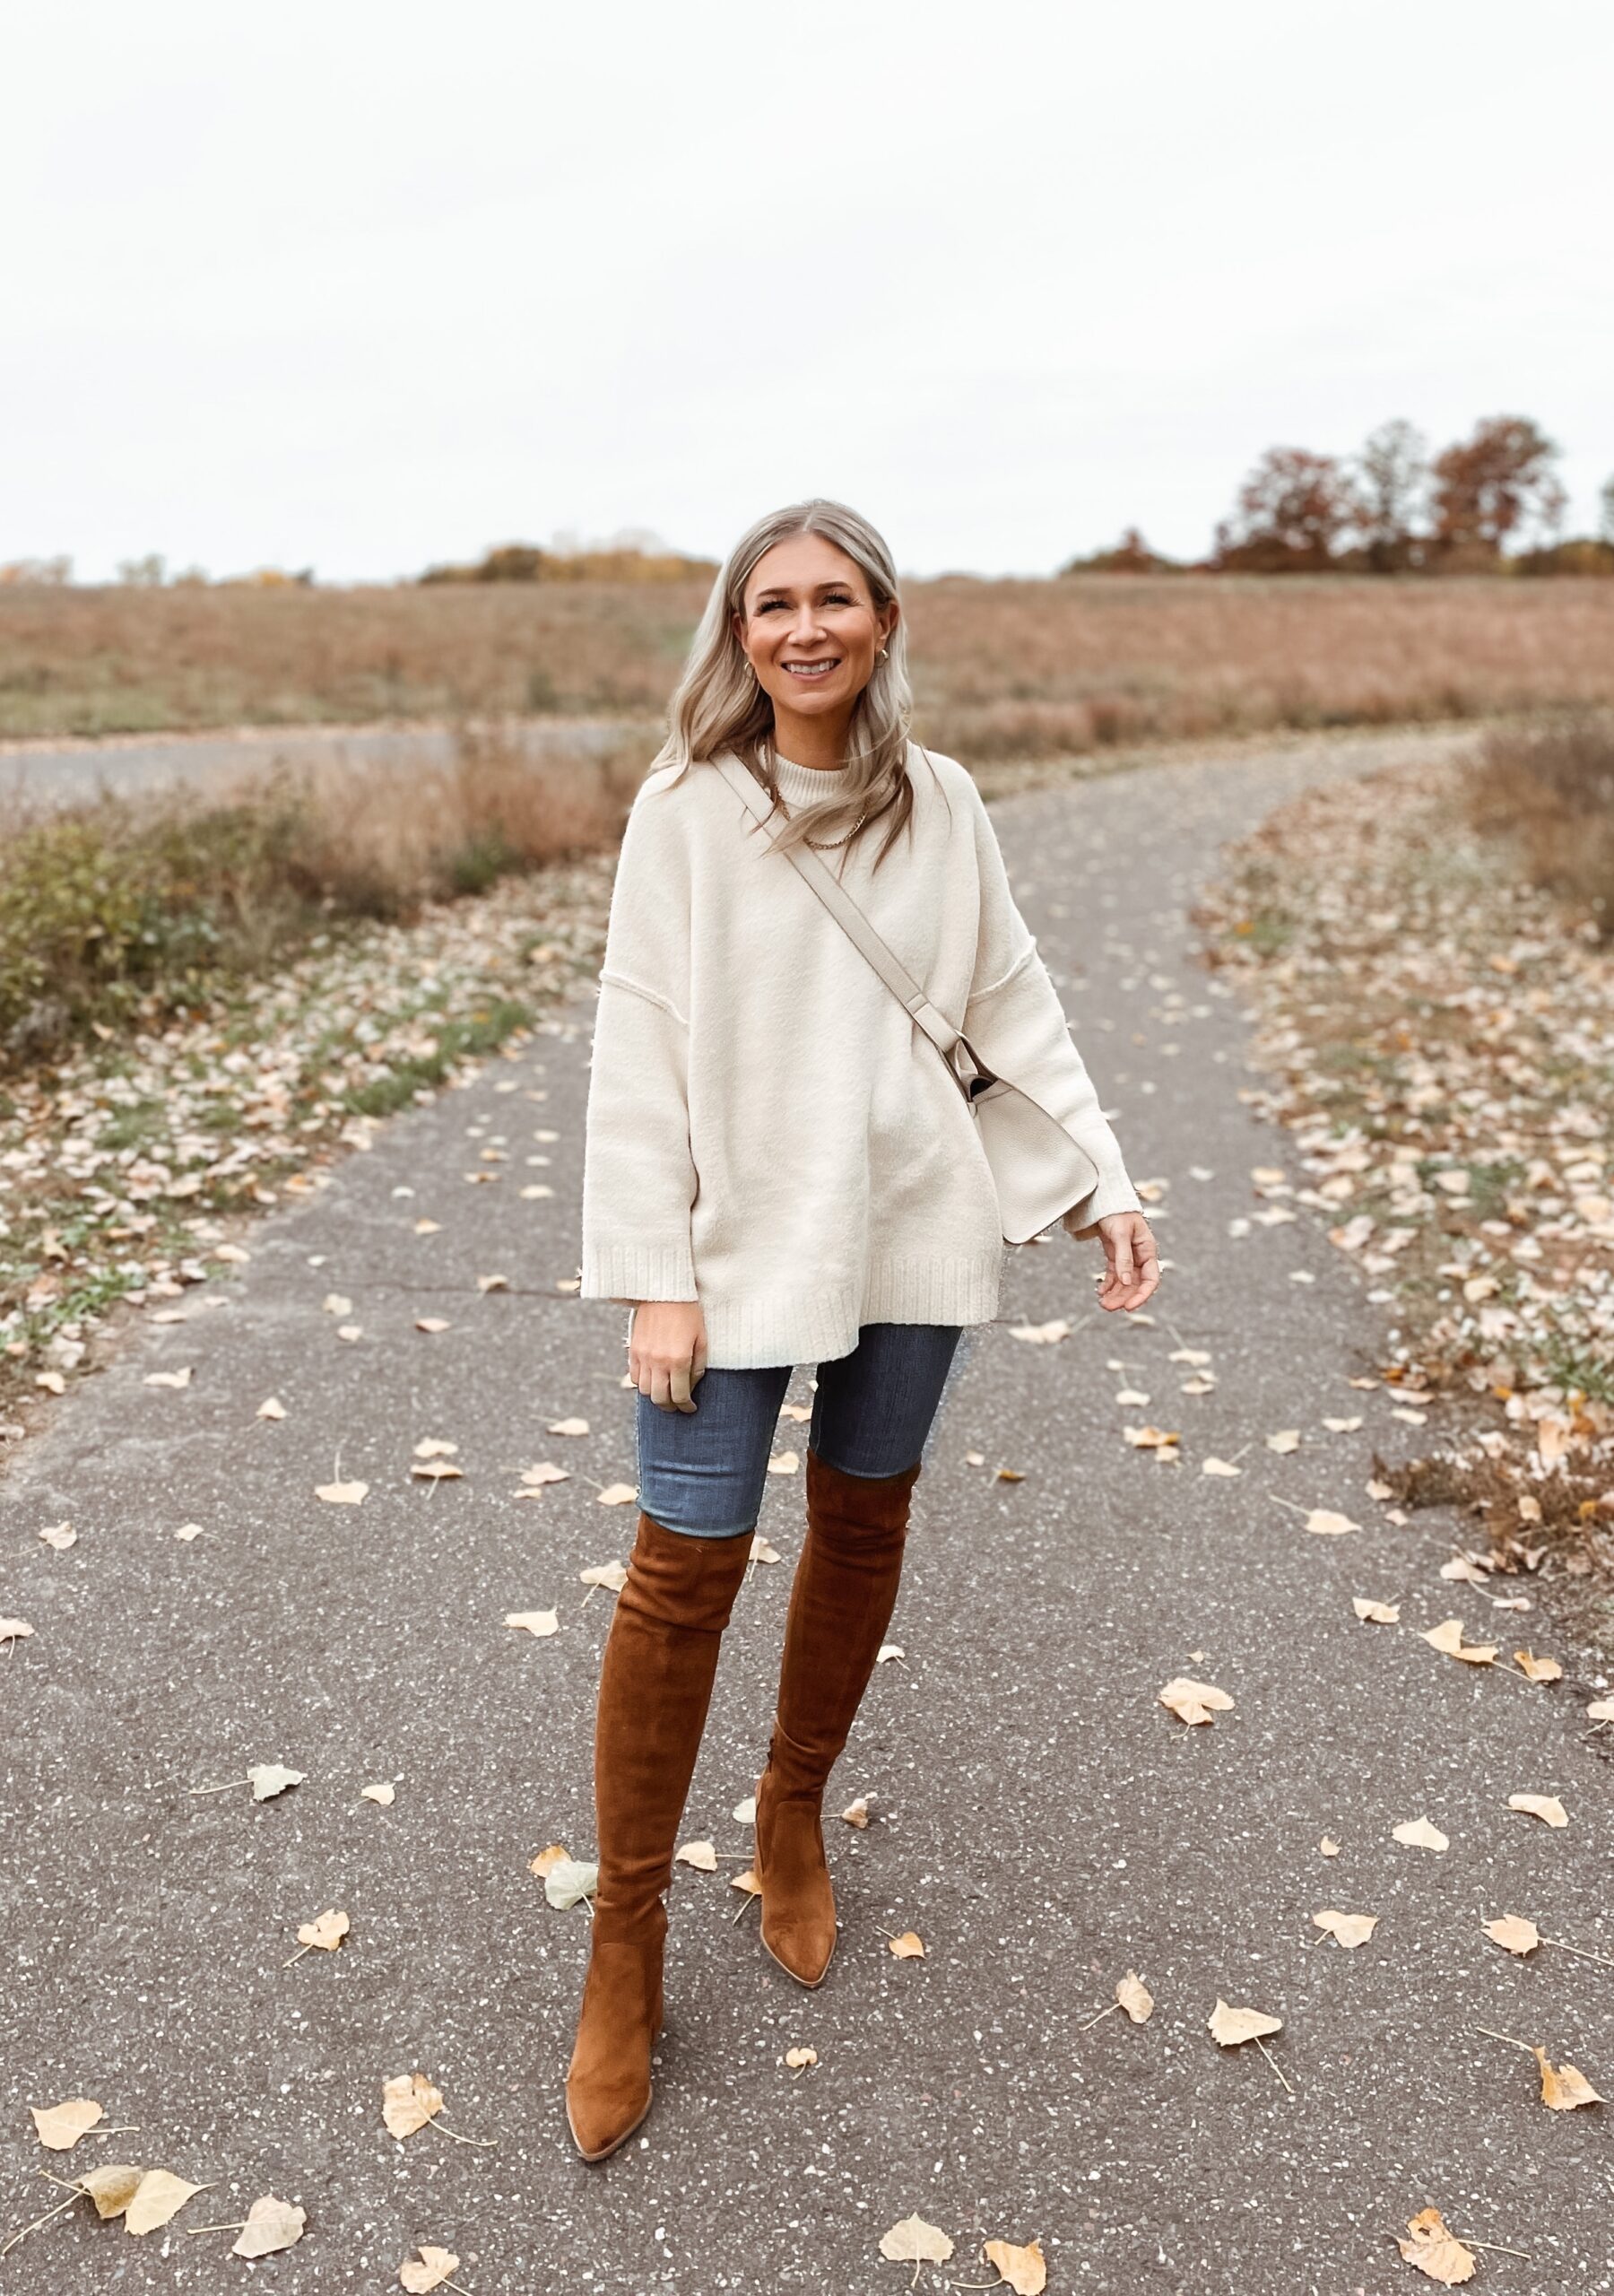 A Cozy Sweater + Over the Knee Boots. Fall Capsule Outfit - Karin Emily